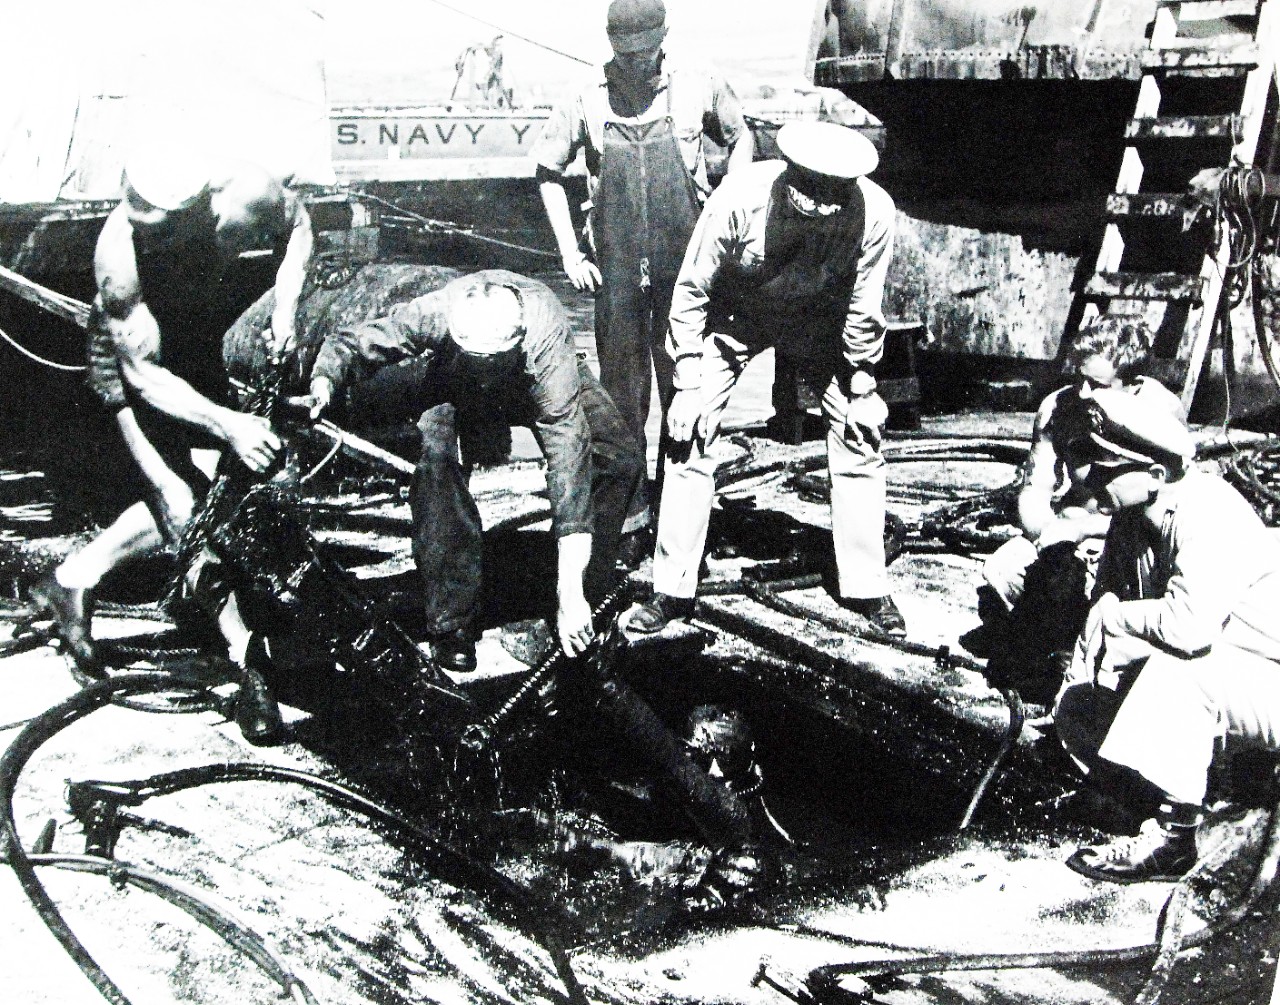 <p>19-LCM-77919: USS Arizona (BB 39), salvage work on board following the Japanese Attack on Pearl Harbor, 7 December 1941. Note diver covered in oil. Photographed probably July 1942.&nbsp;</p>
